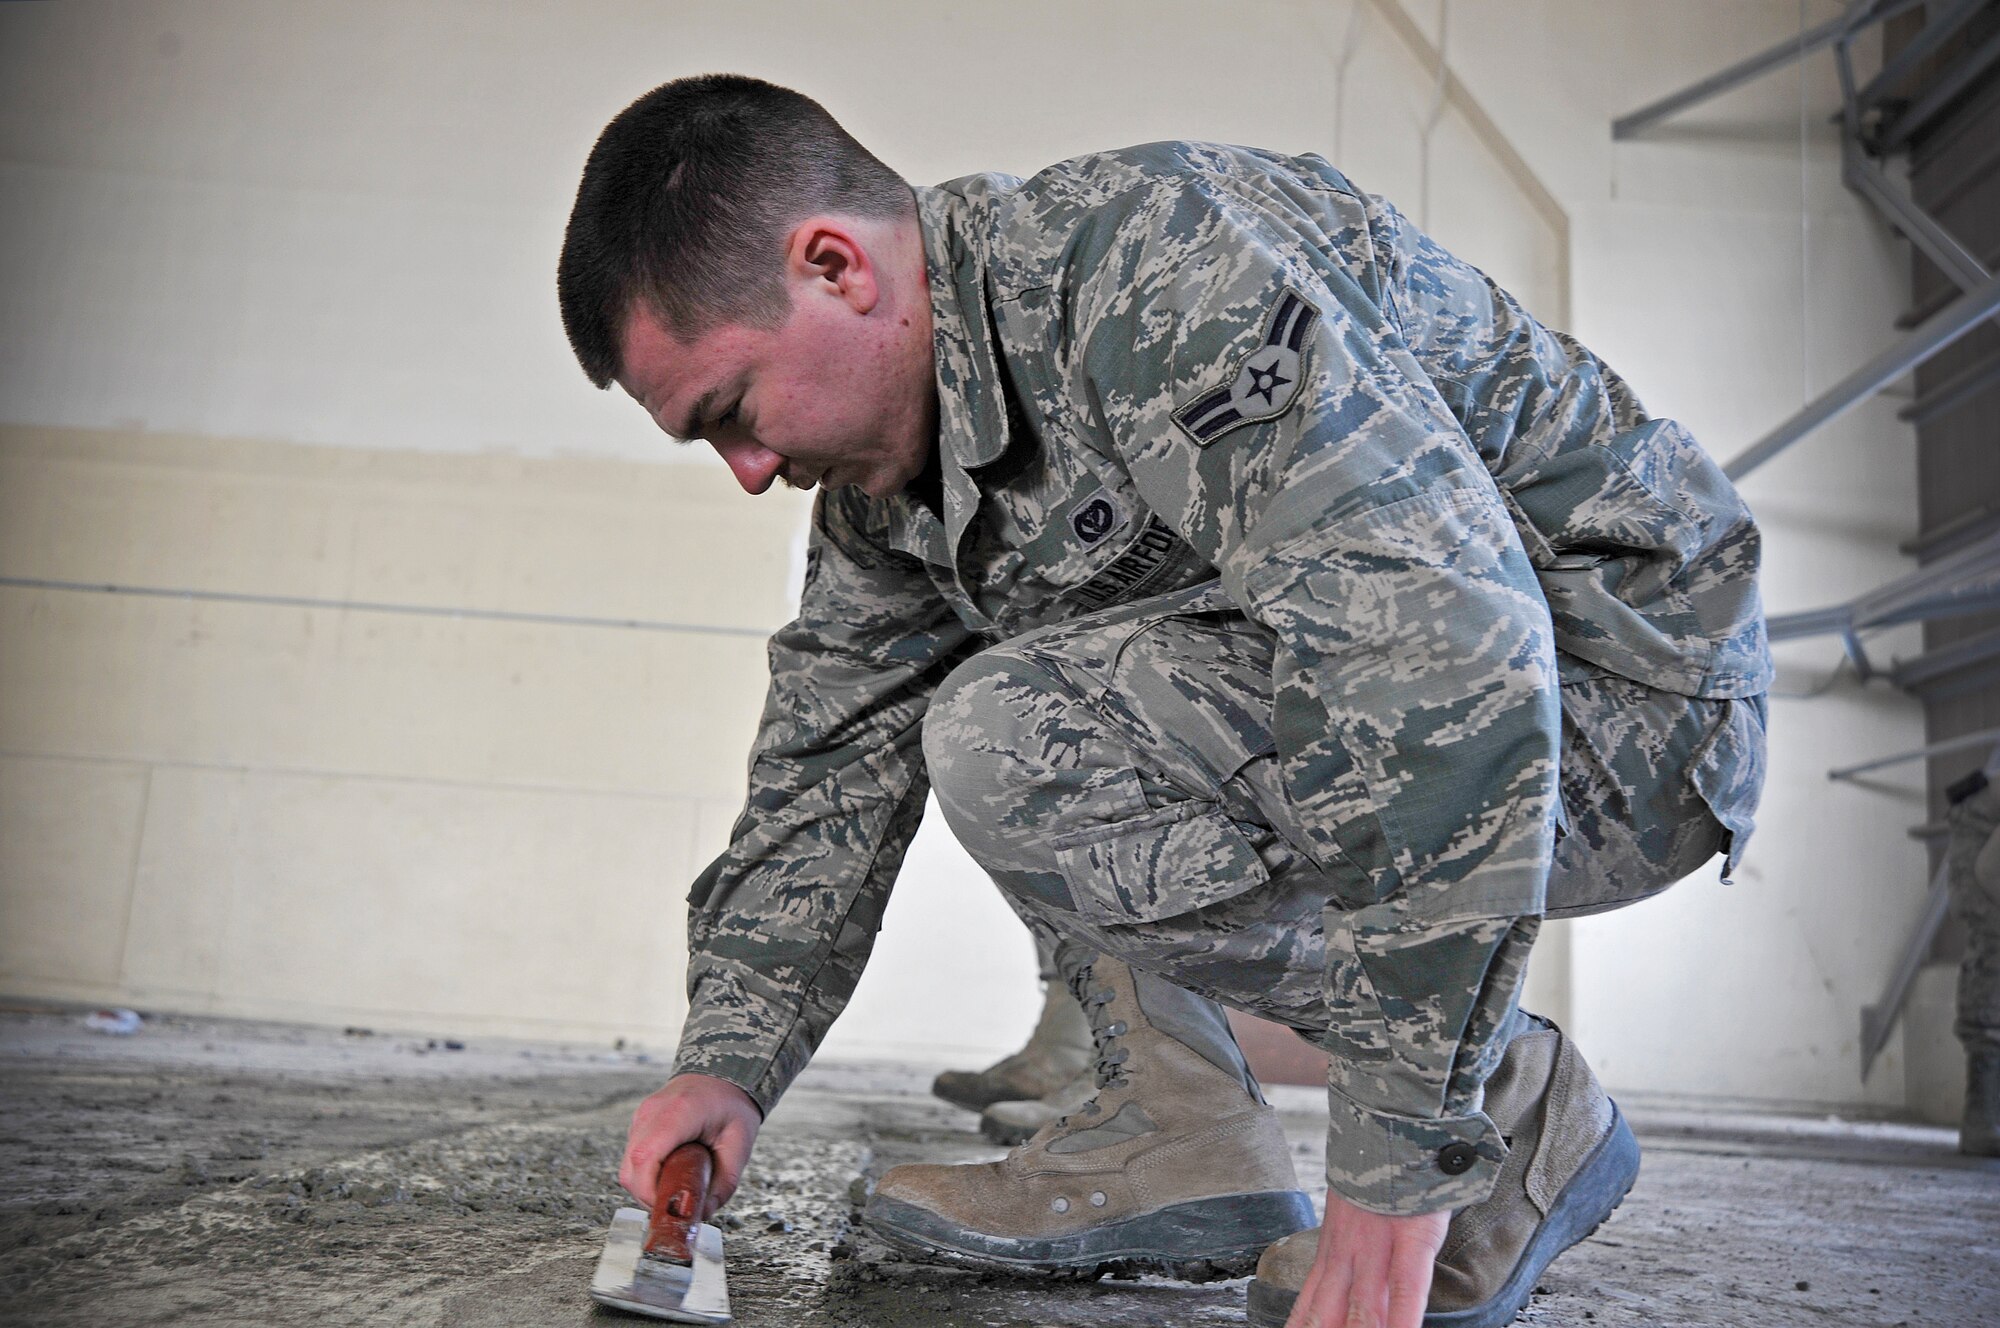 U.S. Air Force Airman 1st Class Jim Boudreau, 35th Civil Engineer Squadron structural apprentice, smoothens out concrete filling at Misawa Air Base, Japan, March 19, 2015. Boudreau and his team of structural maintainers were repaving portions of a dock by the flight line as part of a renovation project. (U.S. Air Force photo by Senior Airman Jose L. Hernandez-Domitilo/Released)